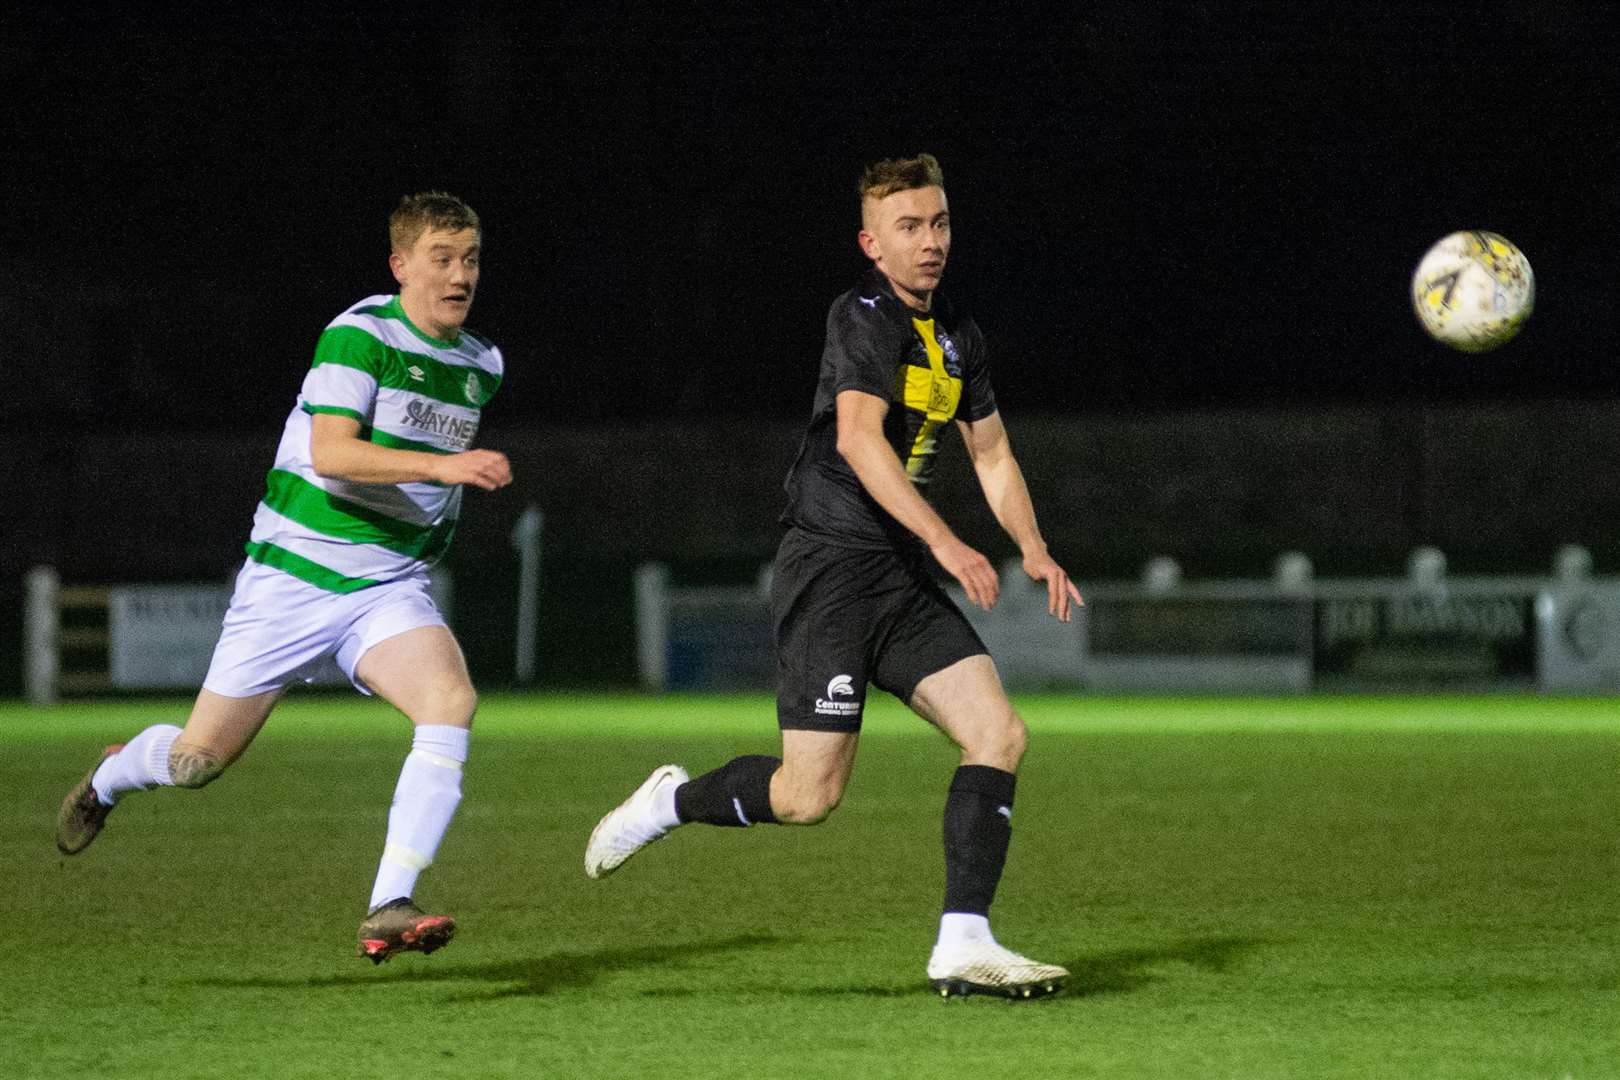 New Jags signing Ryan Fyffe (right) in action for Nairn against Buckie Thistle last season.